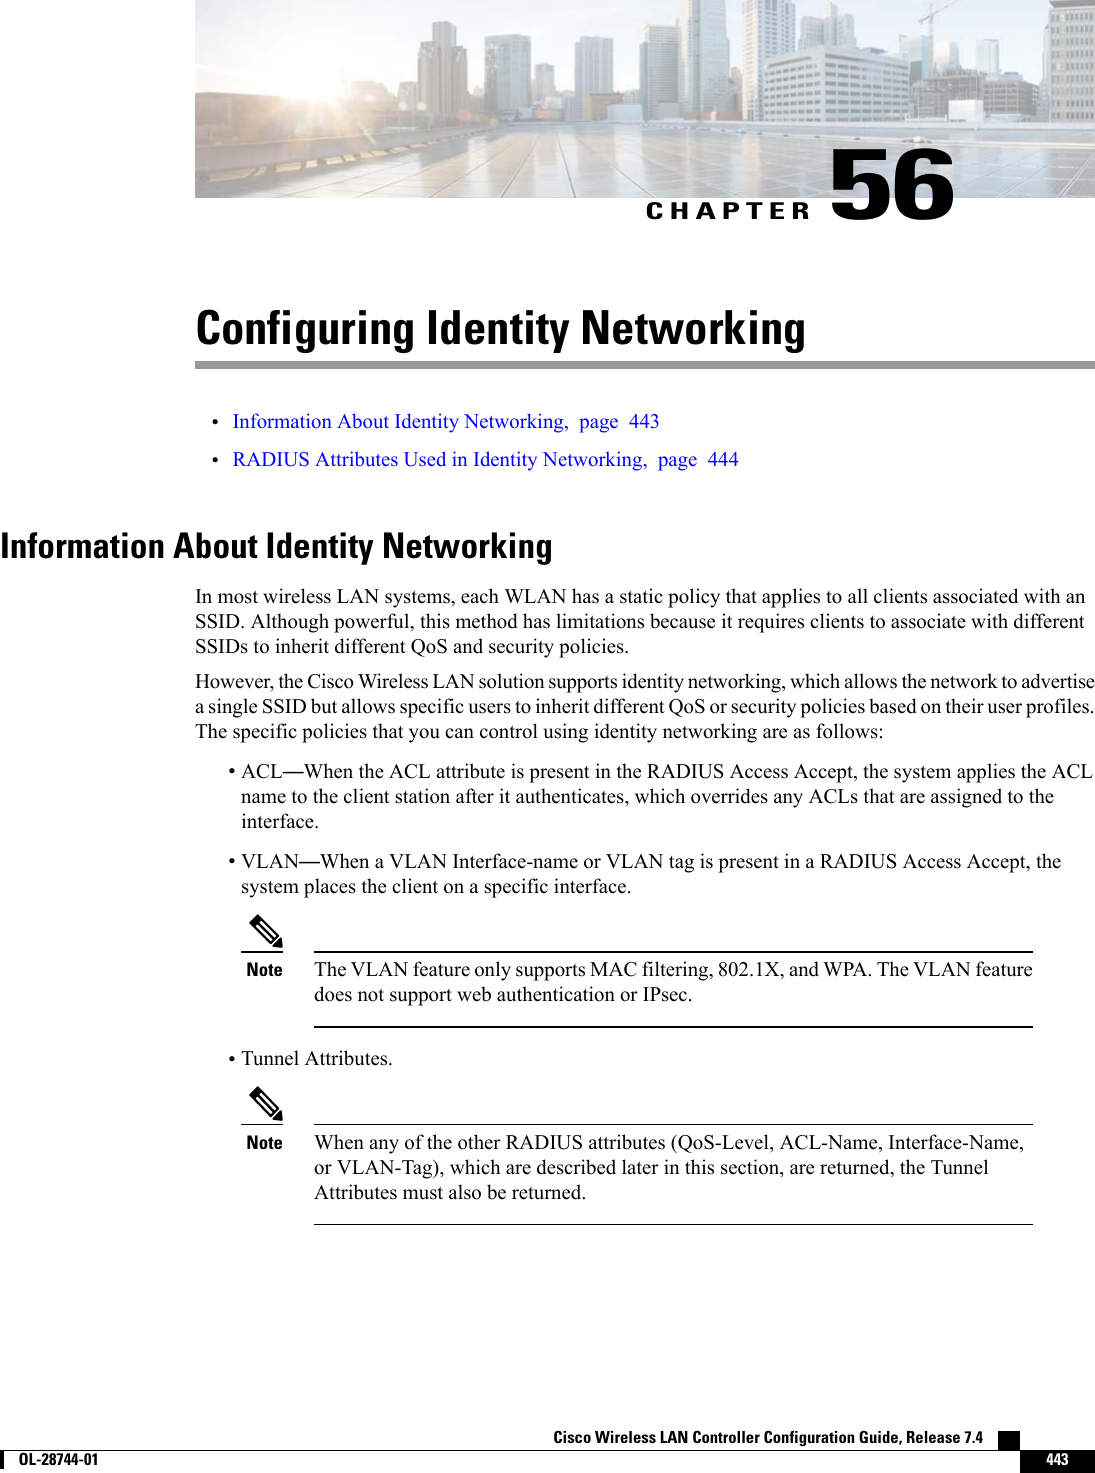 CHAPTER 56Configuring Identity Networking•Information About Identity Networking, page 443•RADIUS Attributes Used in Identity Networking, page 444Information About Identity NetworkingIn most wireless LAN systems, each WLAN has a static policy that applies to all clients associated with anSSID. Although powerful, this method has limitations because it requires clients to associate with differentSSIDs to inherit different QoS and security policies.However, the Cisco Wireless LAN solution supports identity networking, which allows the network to advertisea single SSID but allows specific users to inherit different QoS or security policies based on their user profiles.The specific policies that you can control using identity networking are as follows:•ACL—When the ACL attribute is present in the RADIUS Access Accept, the system applies the ACLname to the client station after it authenticates, which overrides any ACLs that are assigned to theinterface.•VLAN—When a VLAN Interface-name or VLAN tag is present in a RADIUS Access Accept, thesystem places the client on a specific interface.The VLAN feature only supports MAC filtering, 802.1X, and WPA. The VLAN featuredoes not support web authentication or IPsec.Note•Tunnel Attributes.When any of the other RADIUS attributes (QoS-Level, ACL-Name, Interface-Name,or VLAN-Tag), which are described later in this section, are returned, the TunnelAttributes must also be returned.NoteCisco Wireless LAN Controller Configuration Guide, Release 7.4        OL-28744-01 443